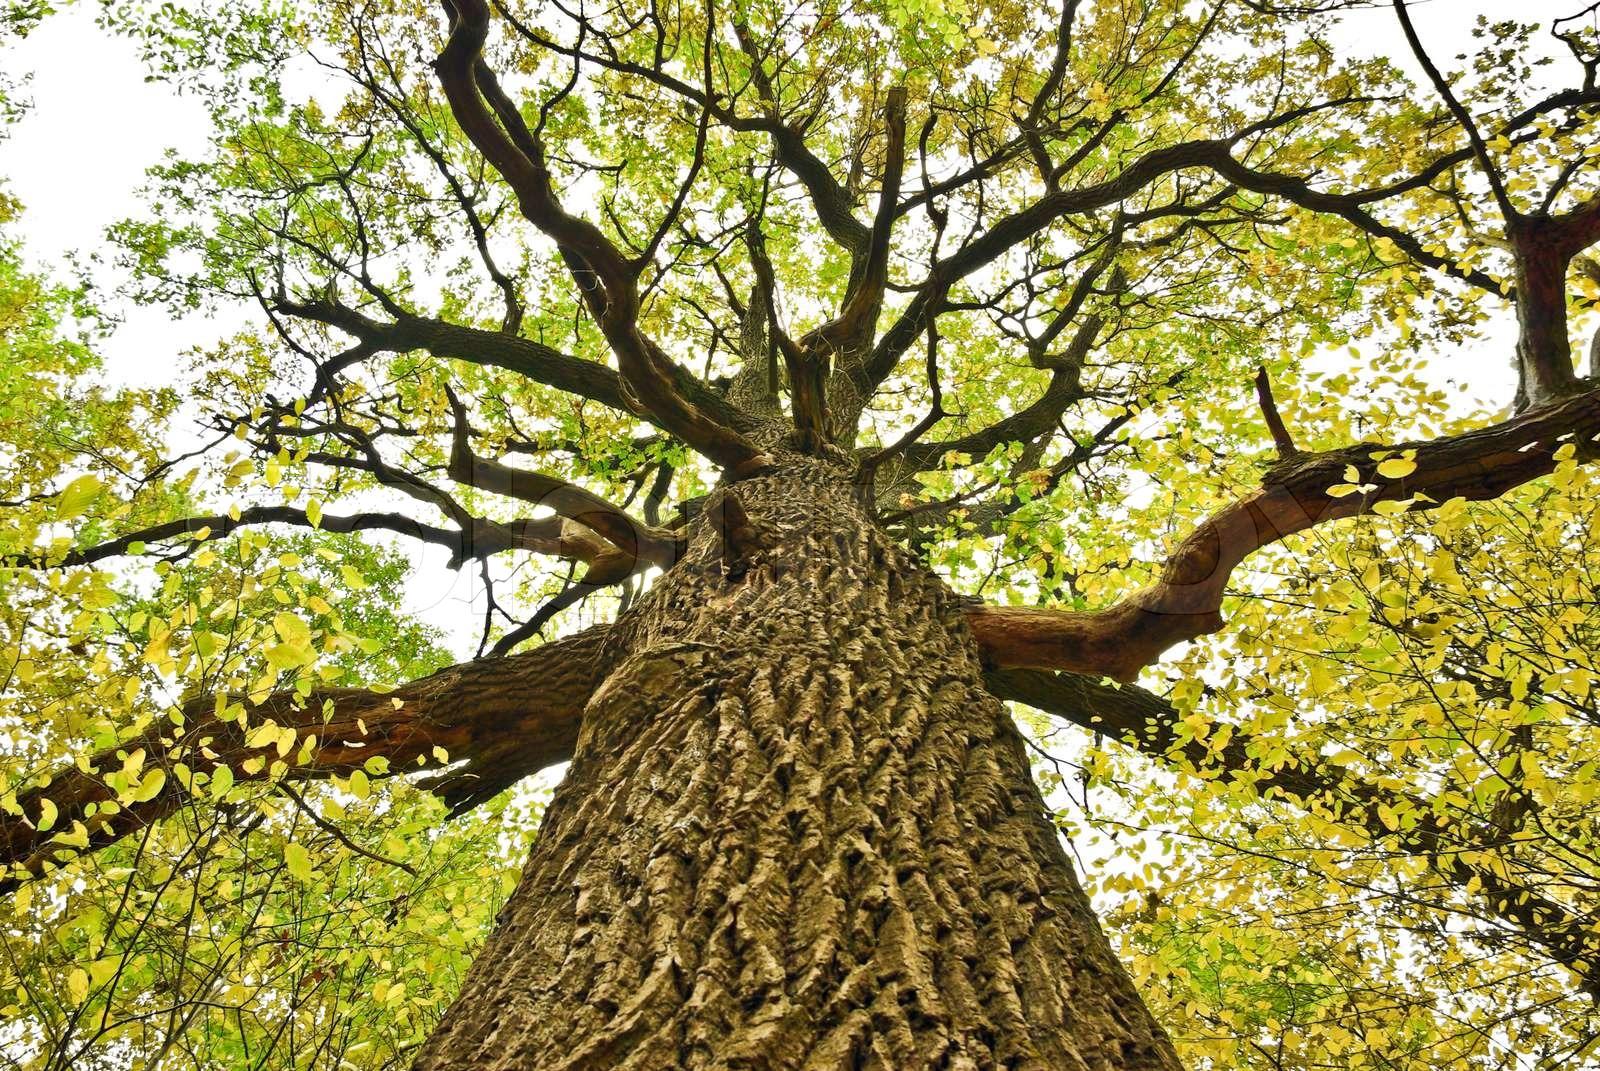 Big old oak tree in the autumn forest | Stock image | Colourbox